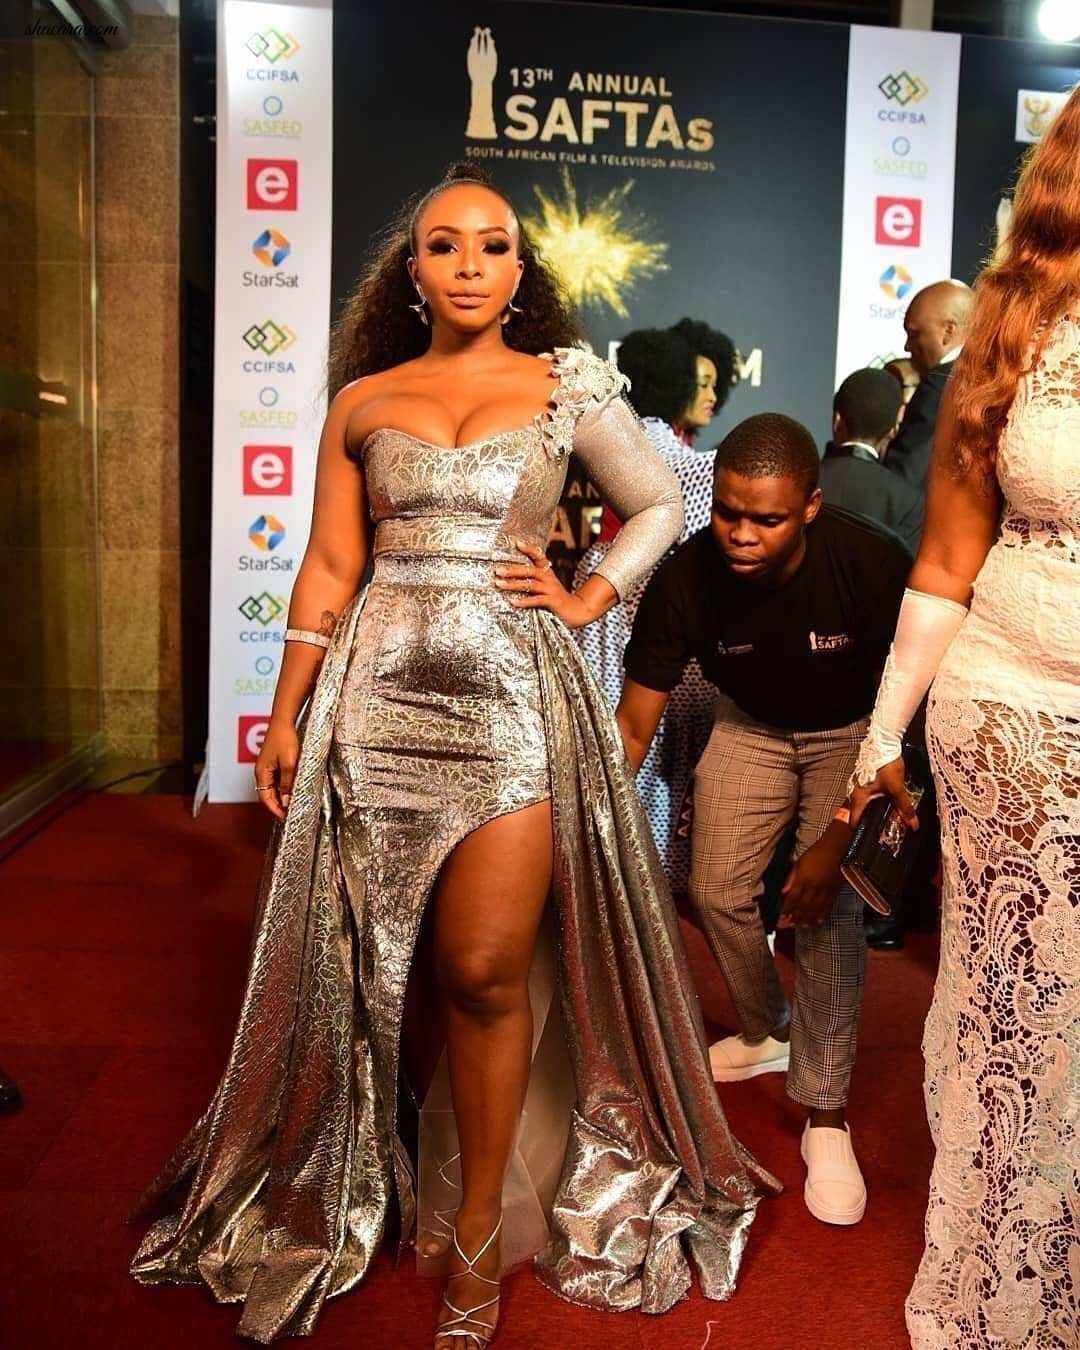 Boity Thulo Looked Stunning In This Daring Silver Look On The #SAFTAS13 Red Carpet